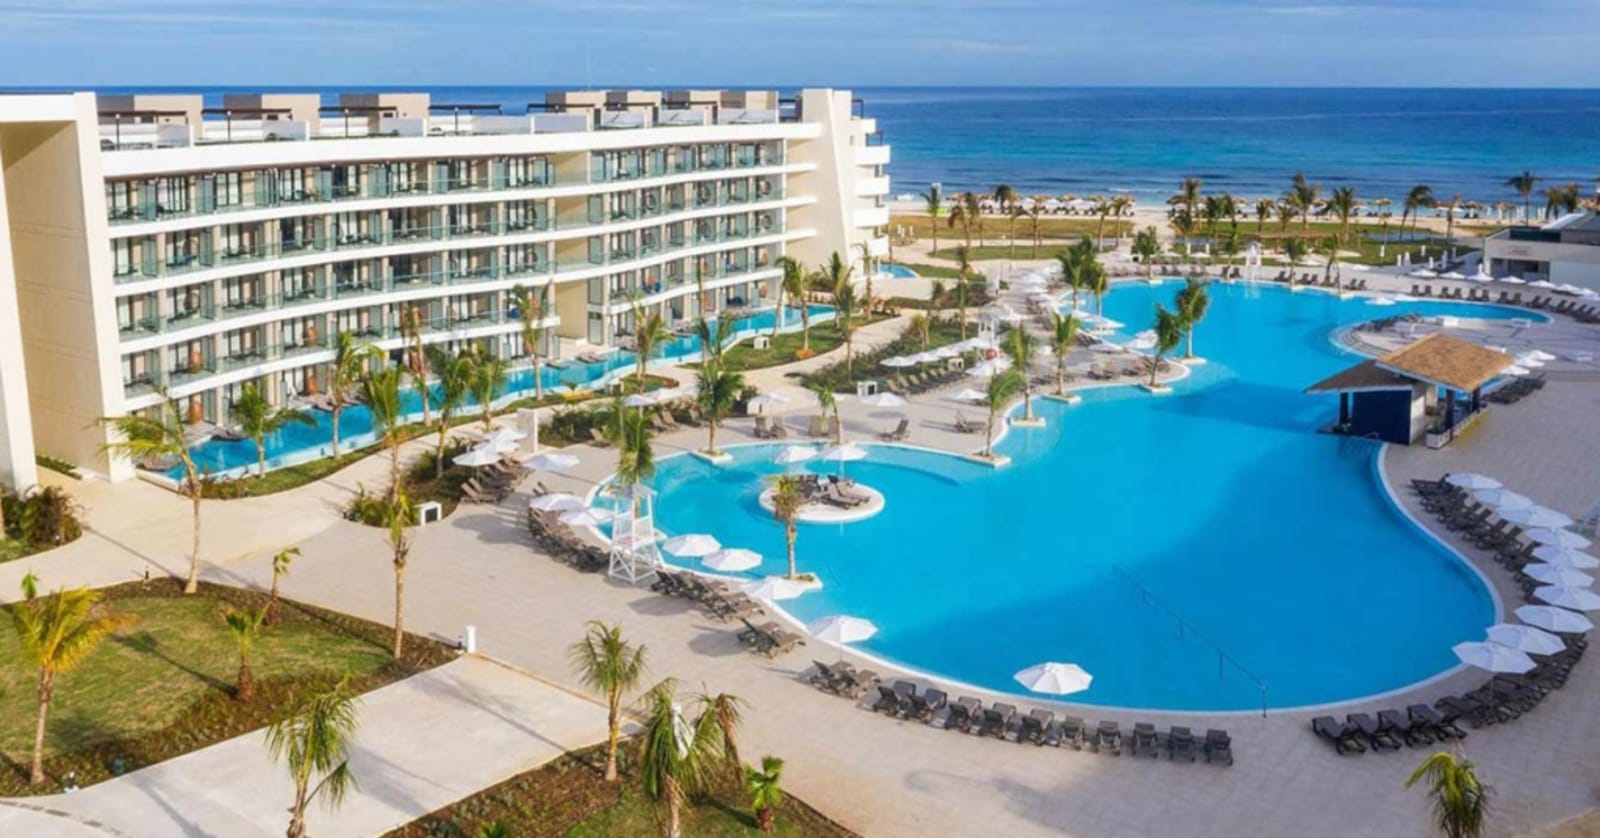 Ocean Coral Spring Resort in Jamaica - large white hotel an immense bright blue pool in front